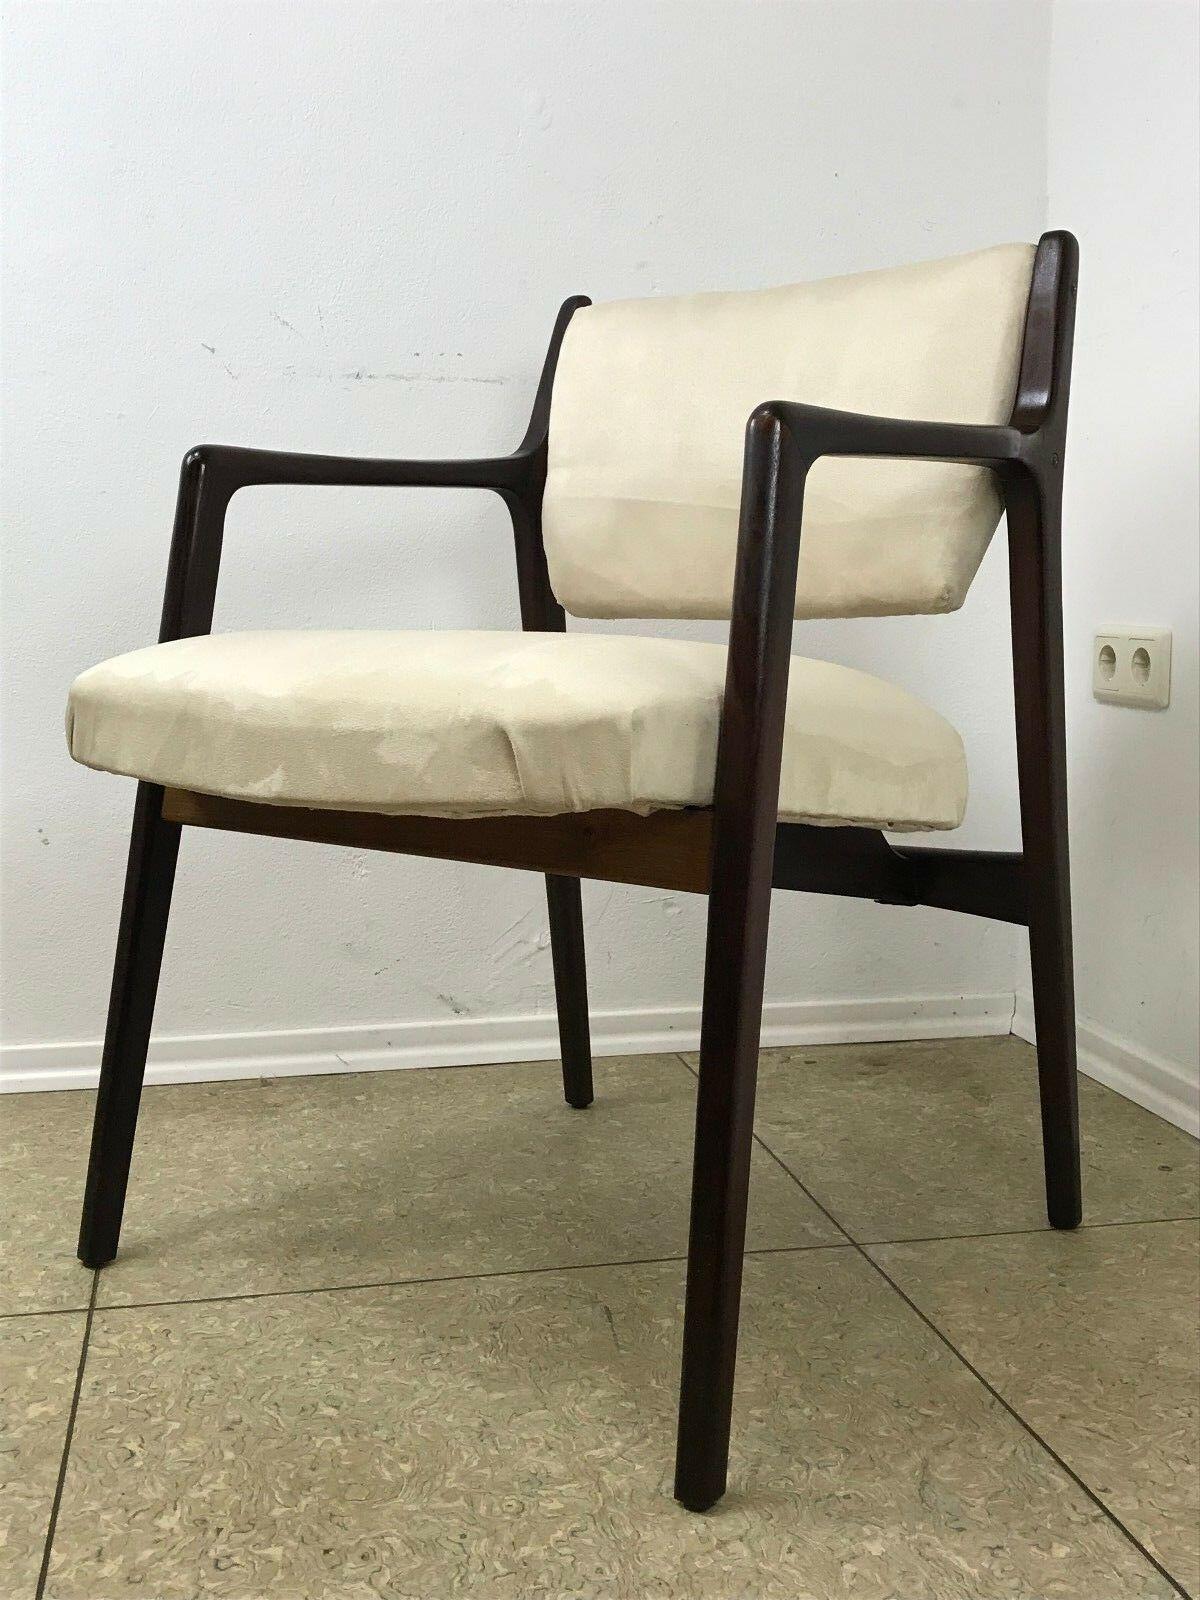 60s 70s dining chair arm chair Danish Design Teak Denmark 60s

Object: armchair

Manufacturer:

Condition: good

Age: around 1960-1970

Dimensions:

60cm x 87cm x 81cm
Seat height = 49cm

Other notes:

The pictures serve as part of